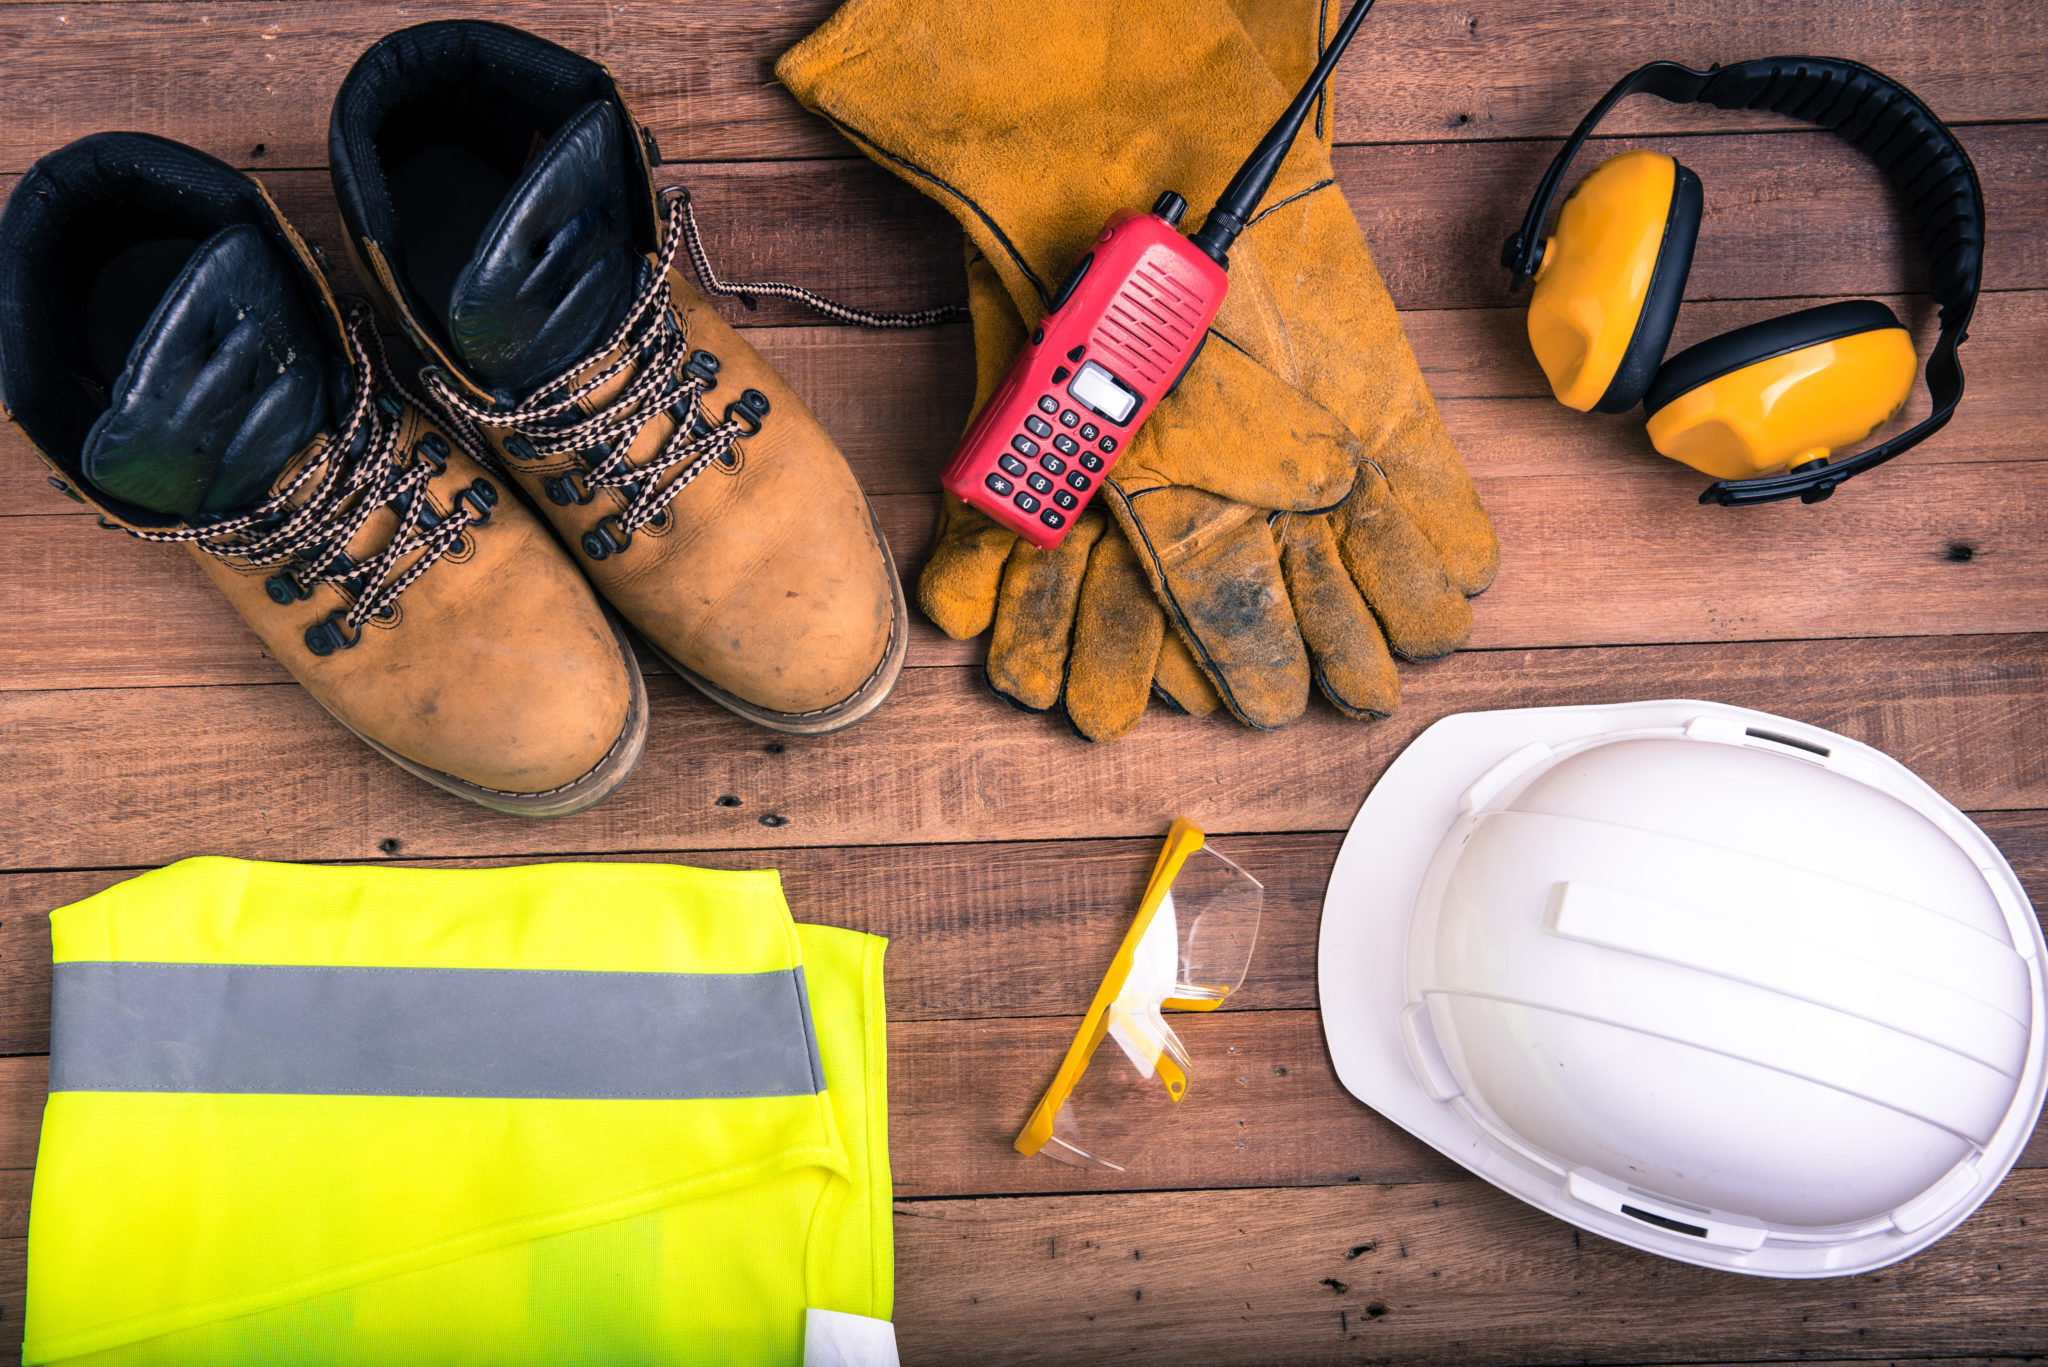 Construction Safety: Best Practices for Keeping Workers and Sites Secure